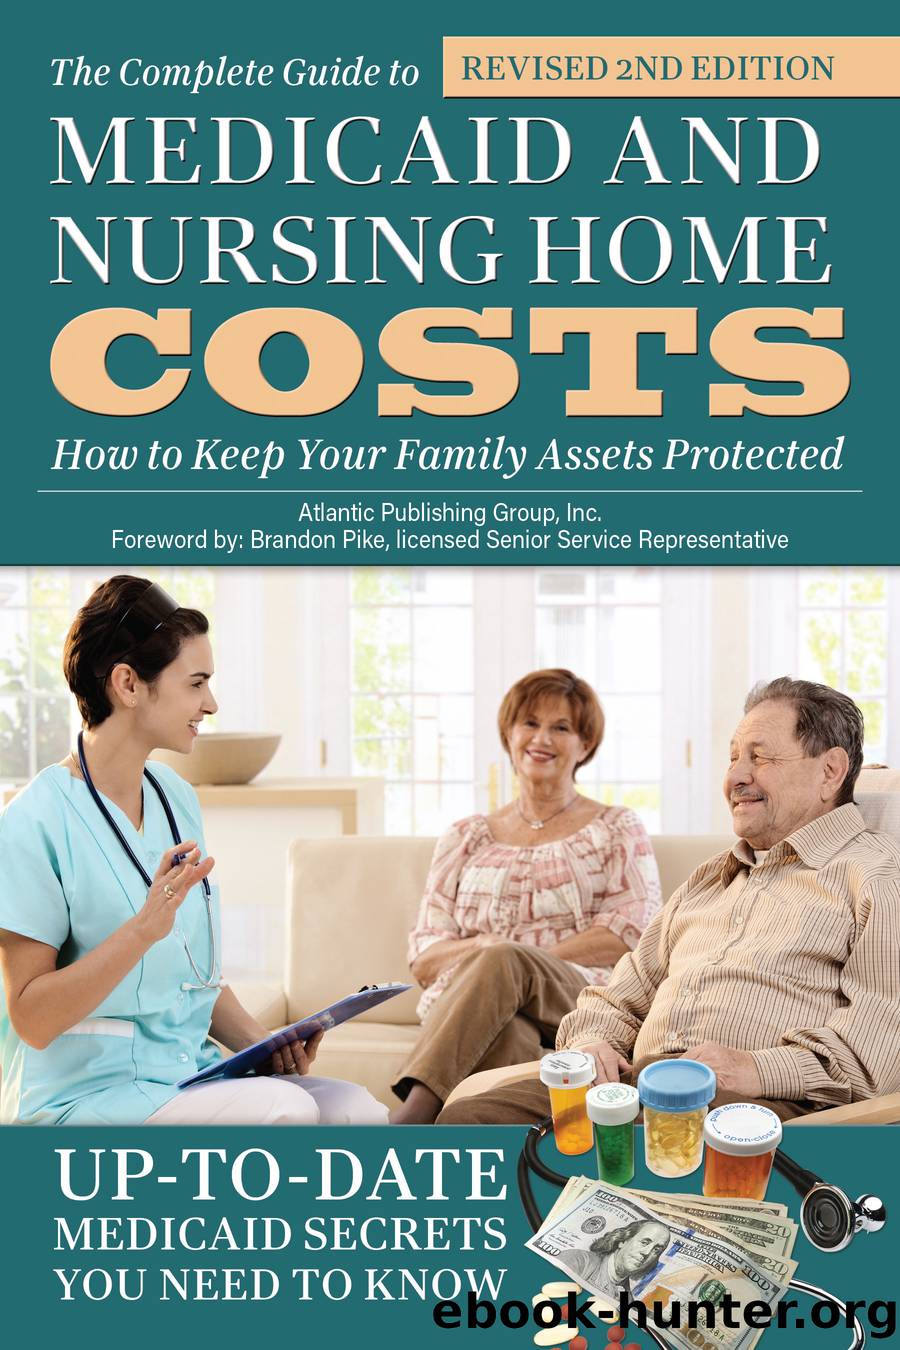 The Complete Guide to Medicaid and Nursing Home Costs by Publishing Atlantic;